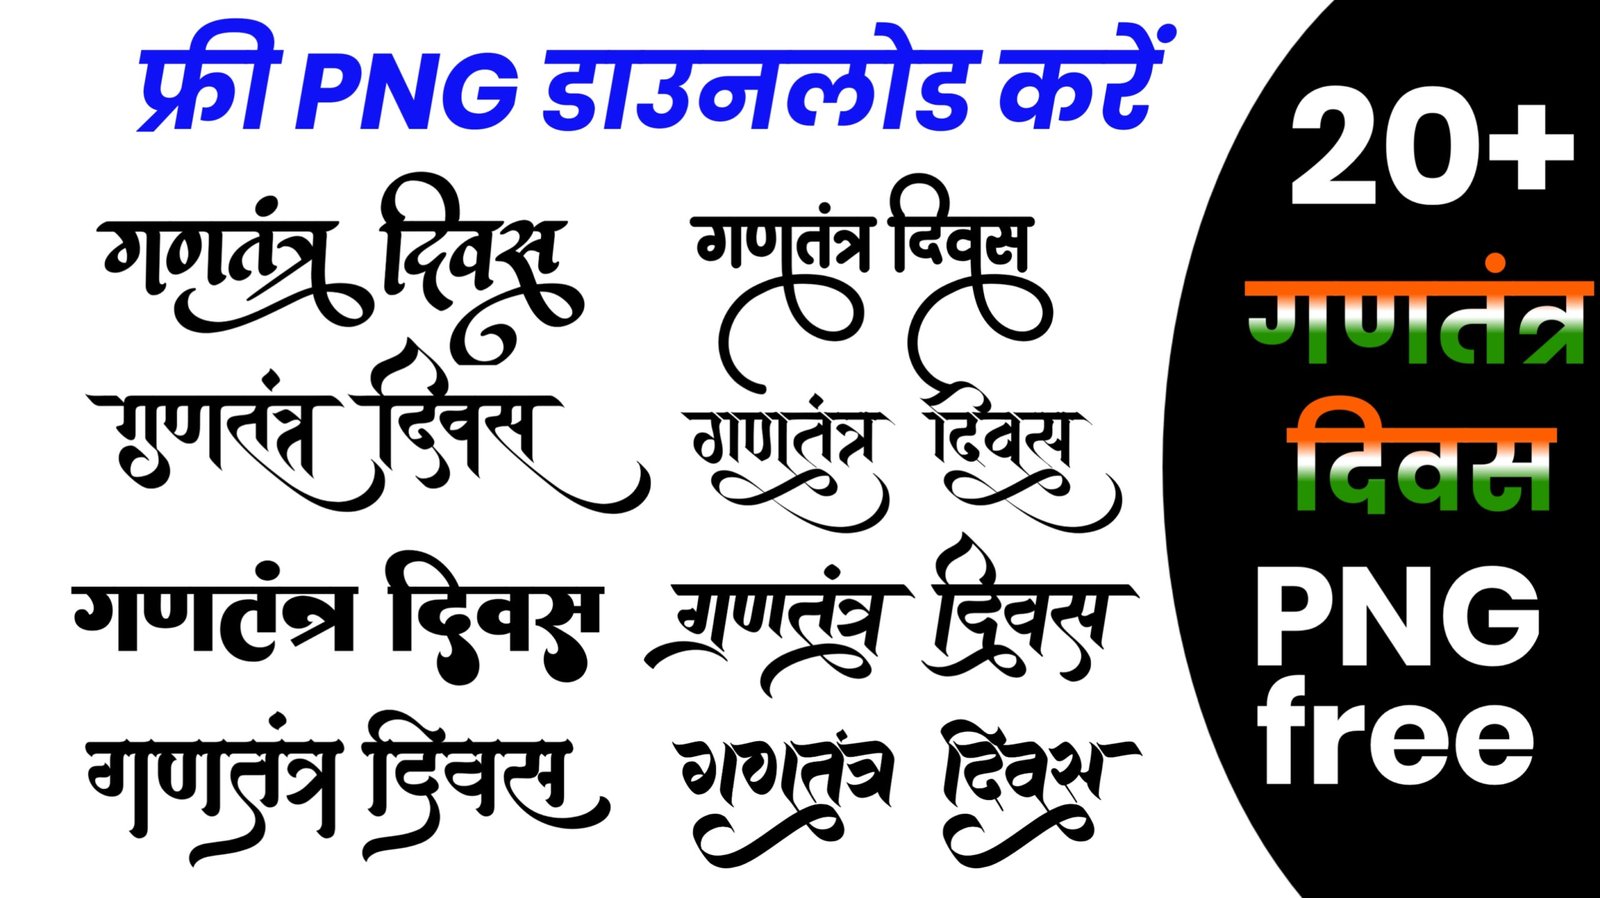 ganatantra Divas text PNG| Republic Day text PNG| 26 January text PNG| ganatantra Divas text PNG| text PNG kaise banaye text PNG kaise download Kare|